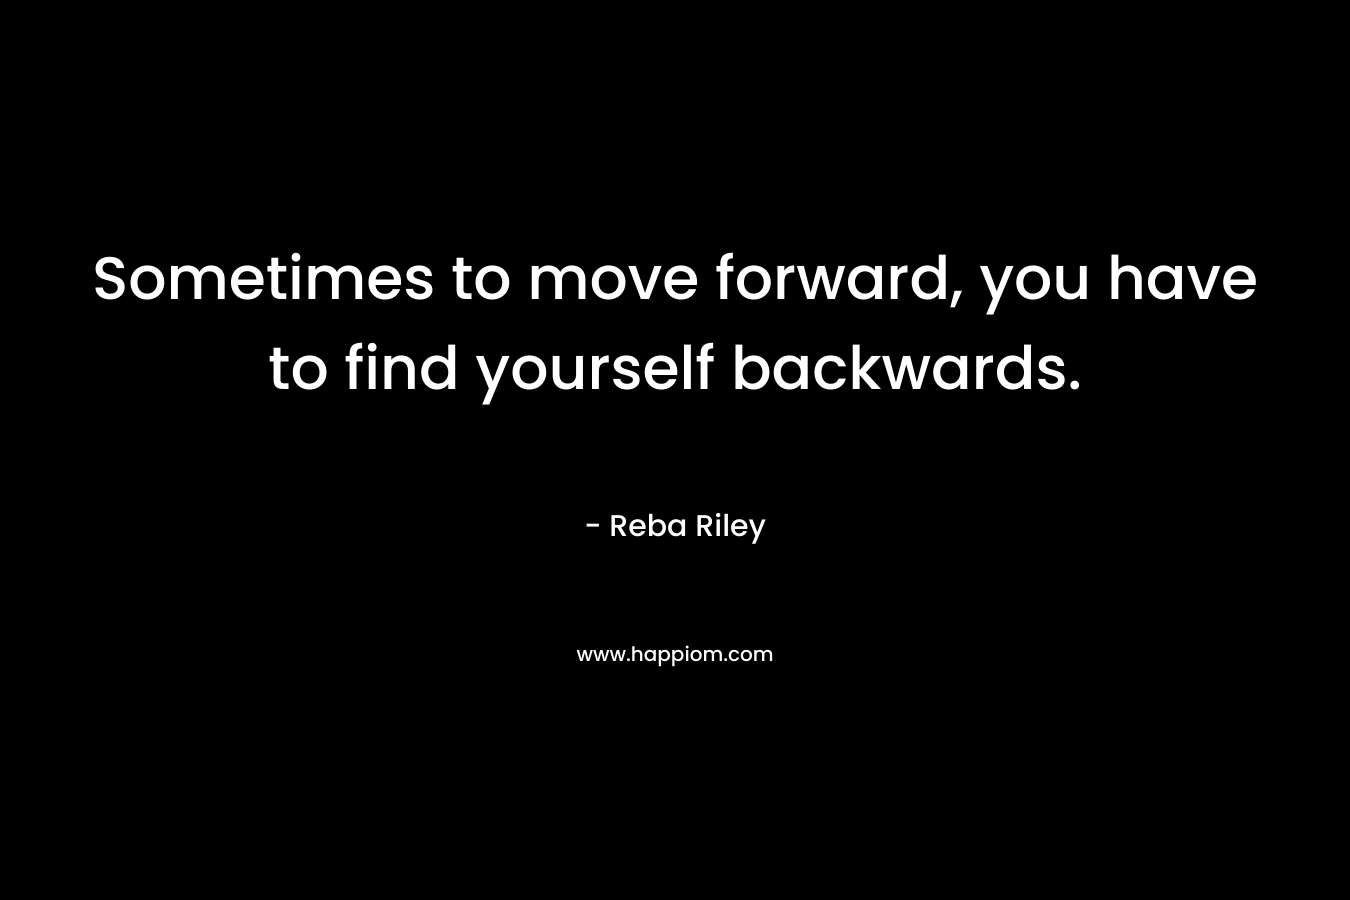 Sometimes to move forward, you have to find yourself backwards. – Reba Riley